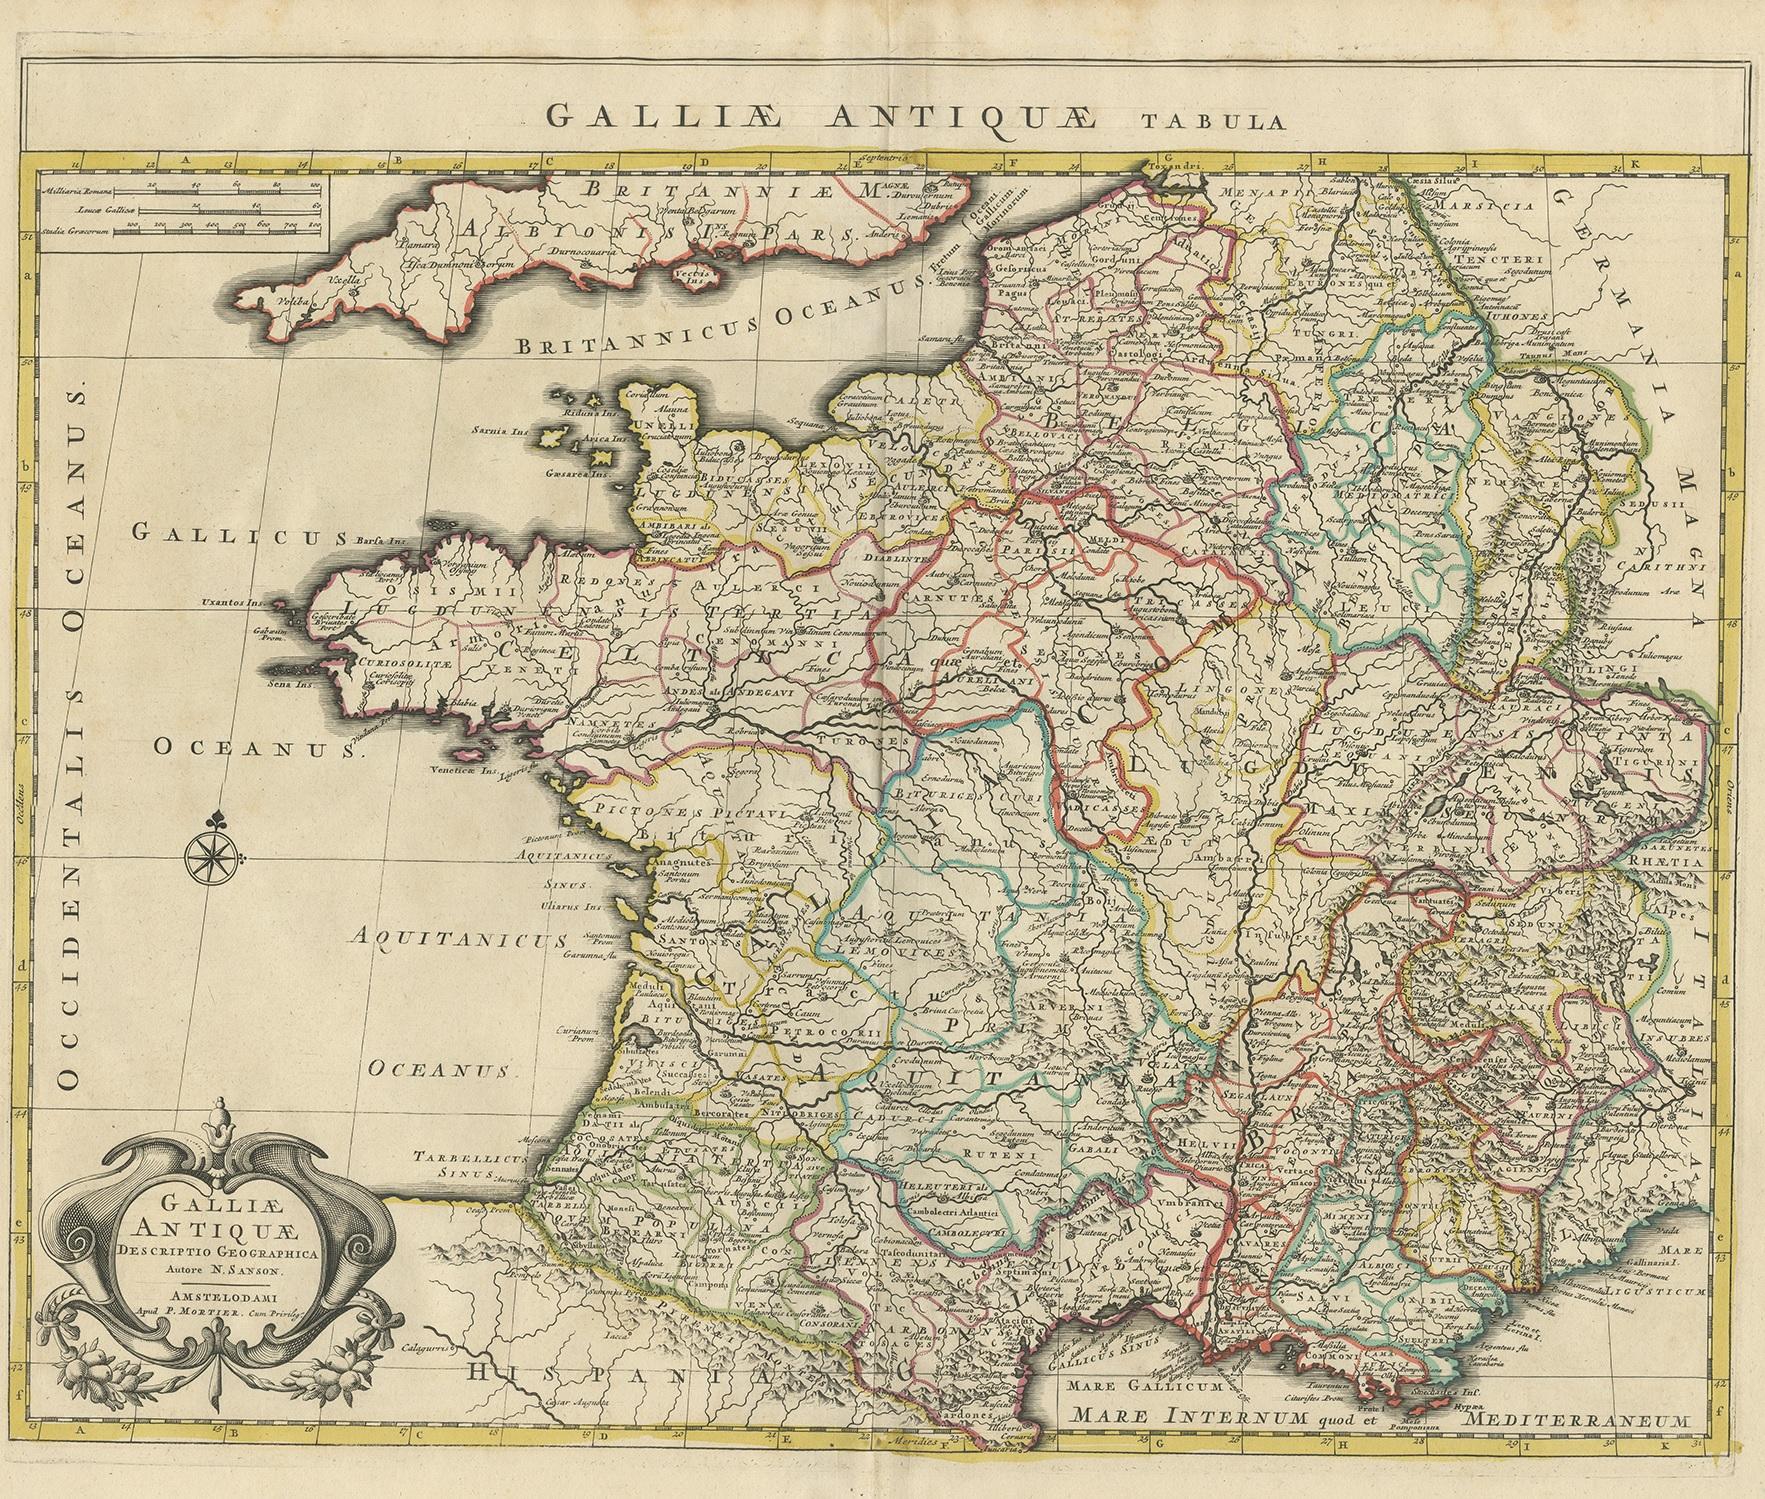 Antique map titled 'Galliae Antiquae Tabula'. Original antique map of France in ancient times. Published by P. Mortier, circa 1730.